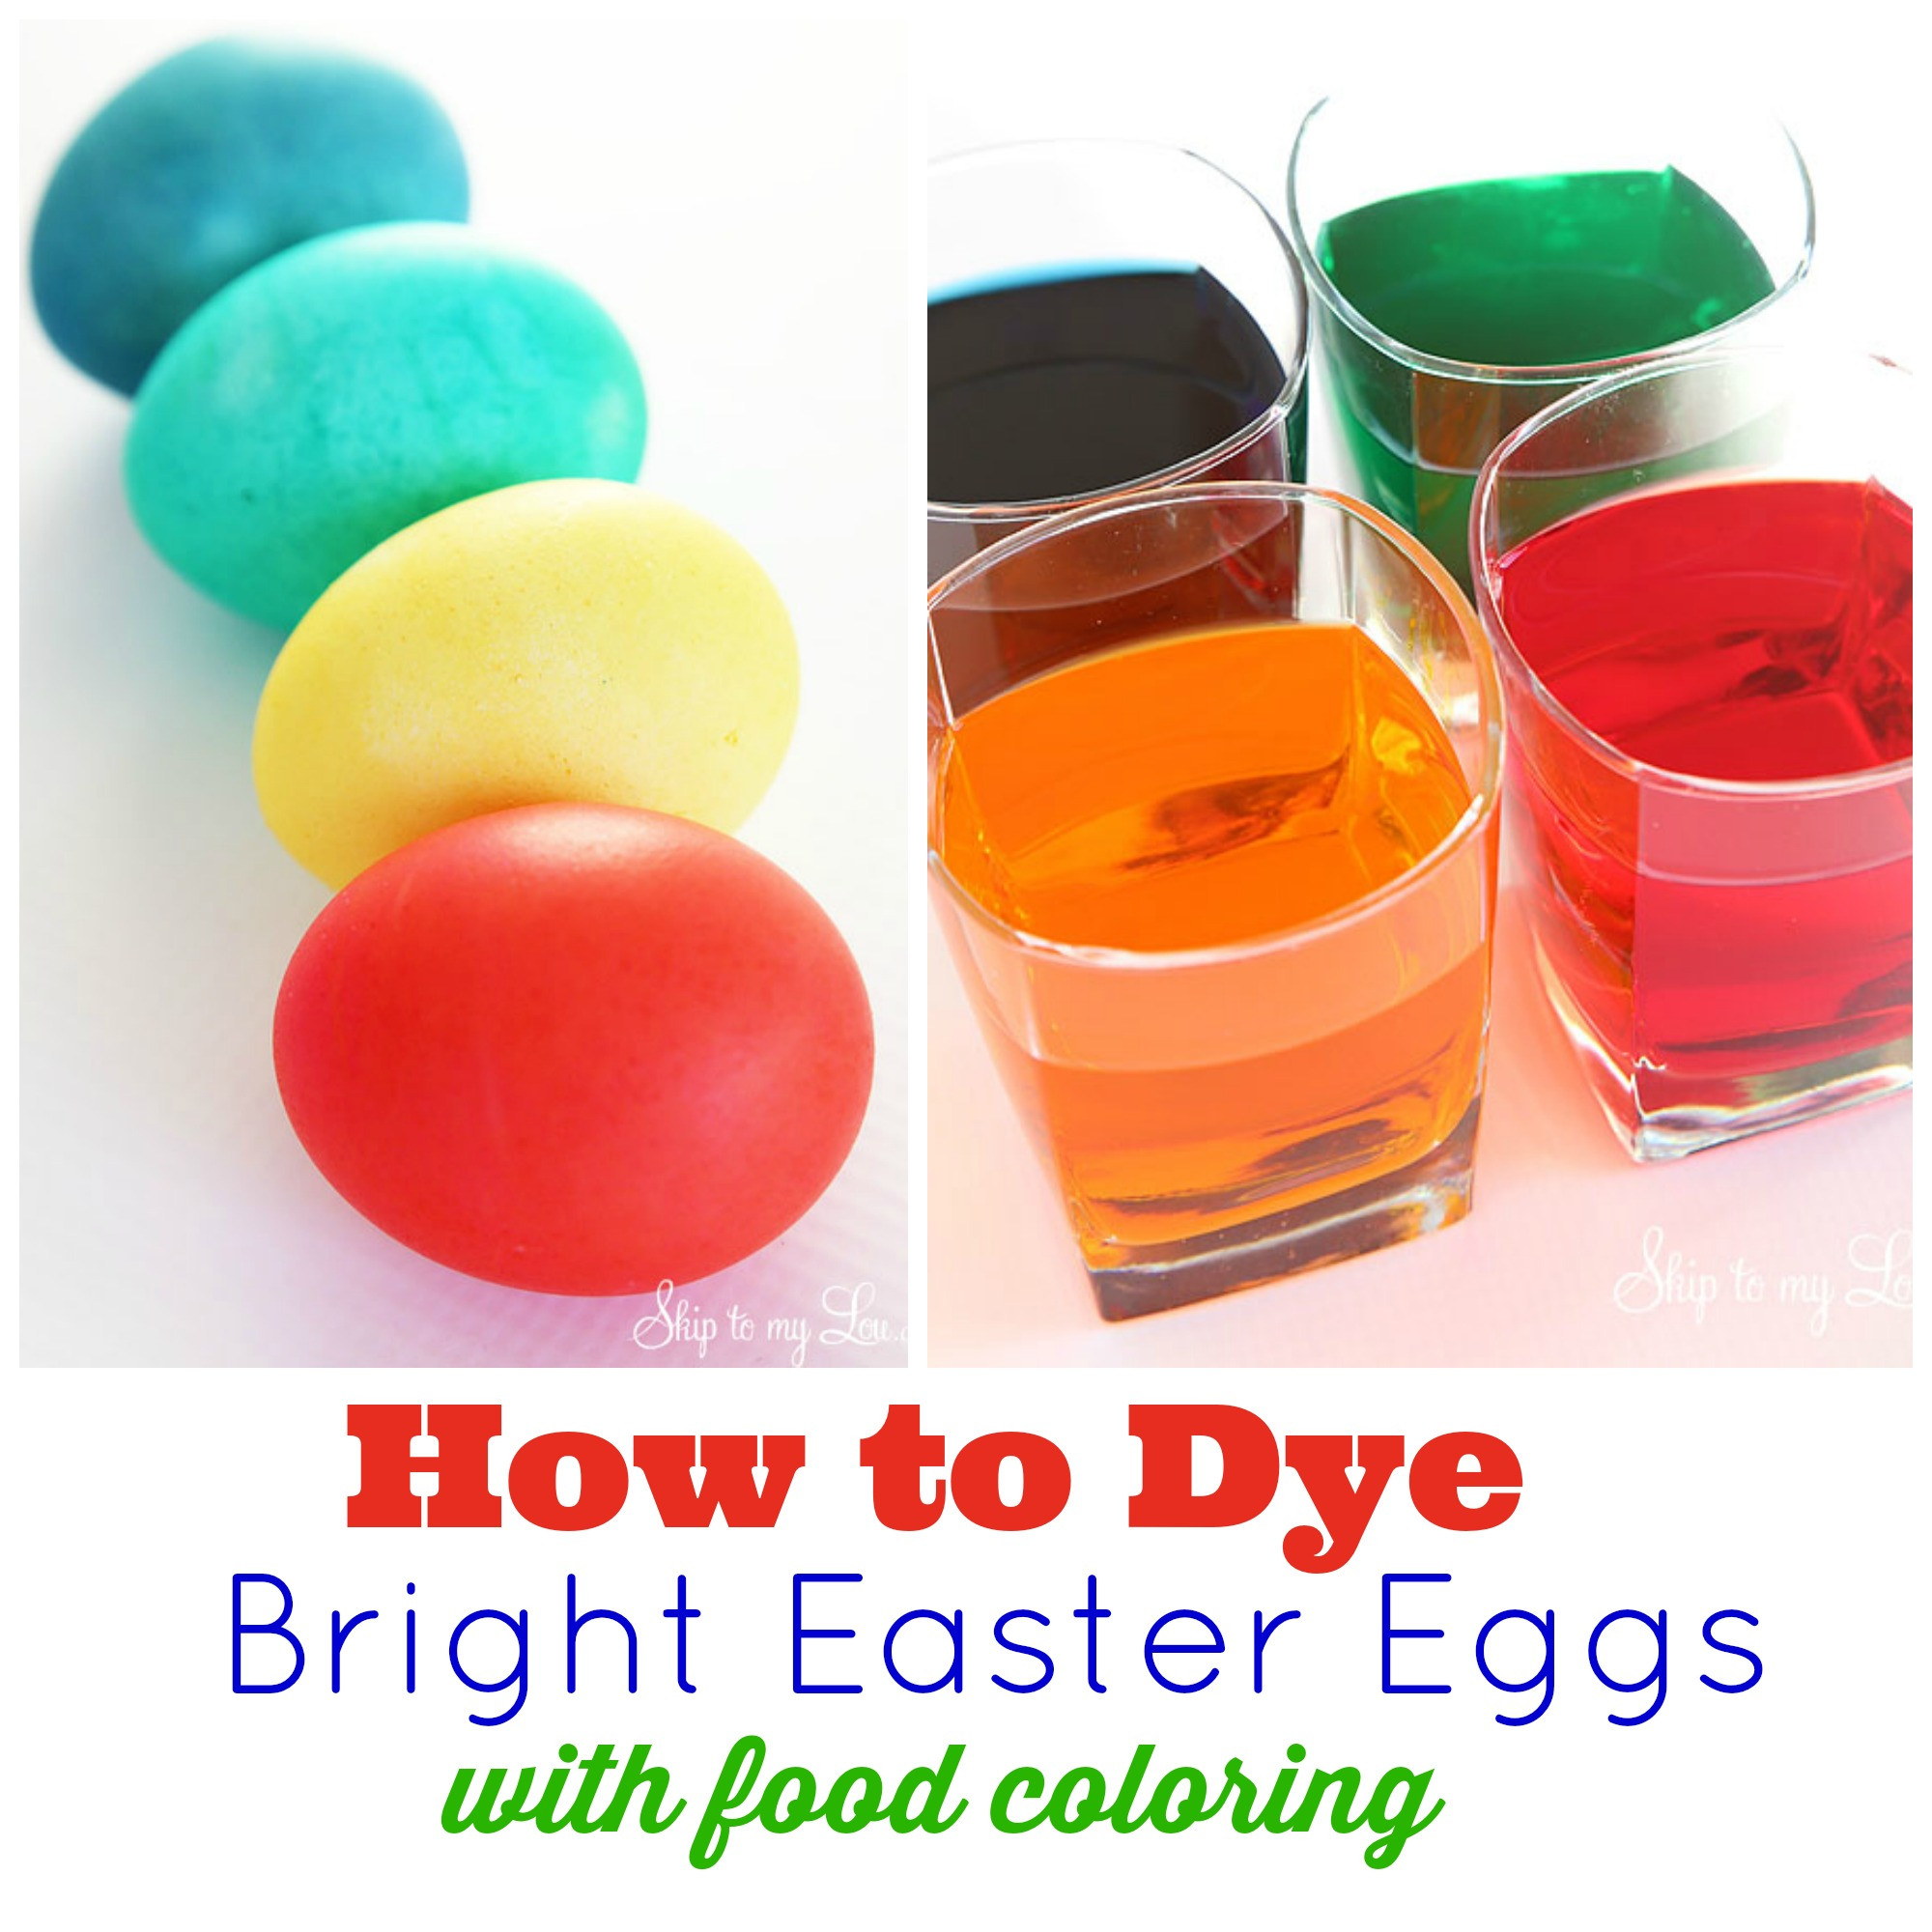 Easter Eggs With Food Coloring
 Ultimate How to for dying Easter eggs with food coloring